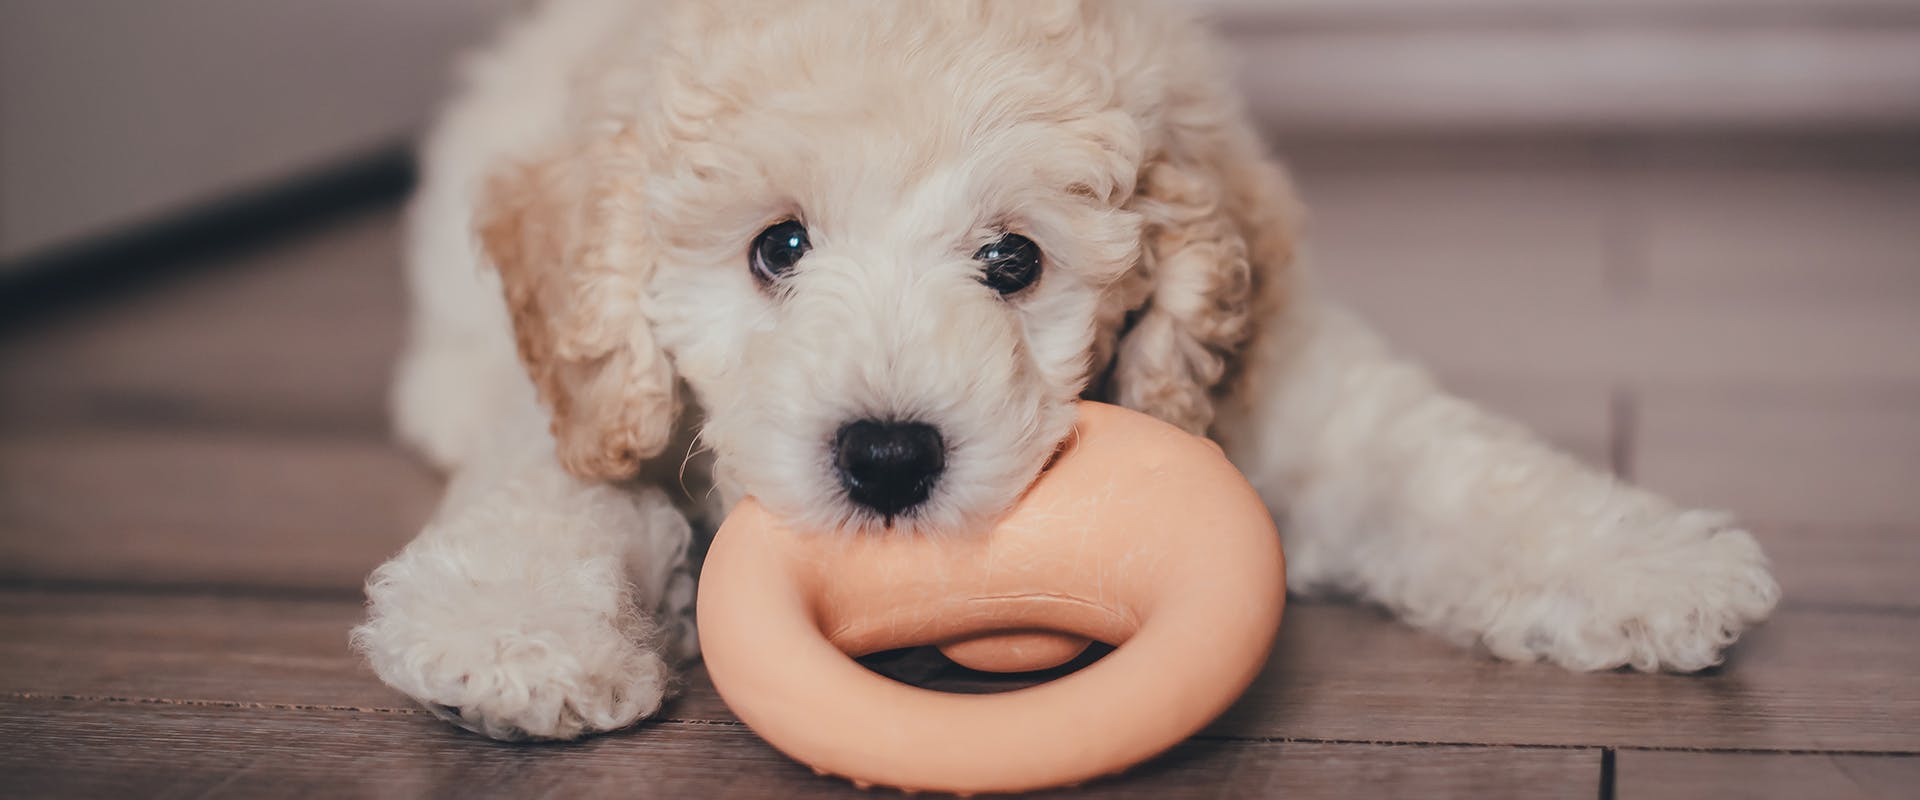 A cute Poochon puppy laying on a wooden floor, with an orange chew toy in its mouth